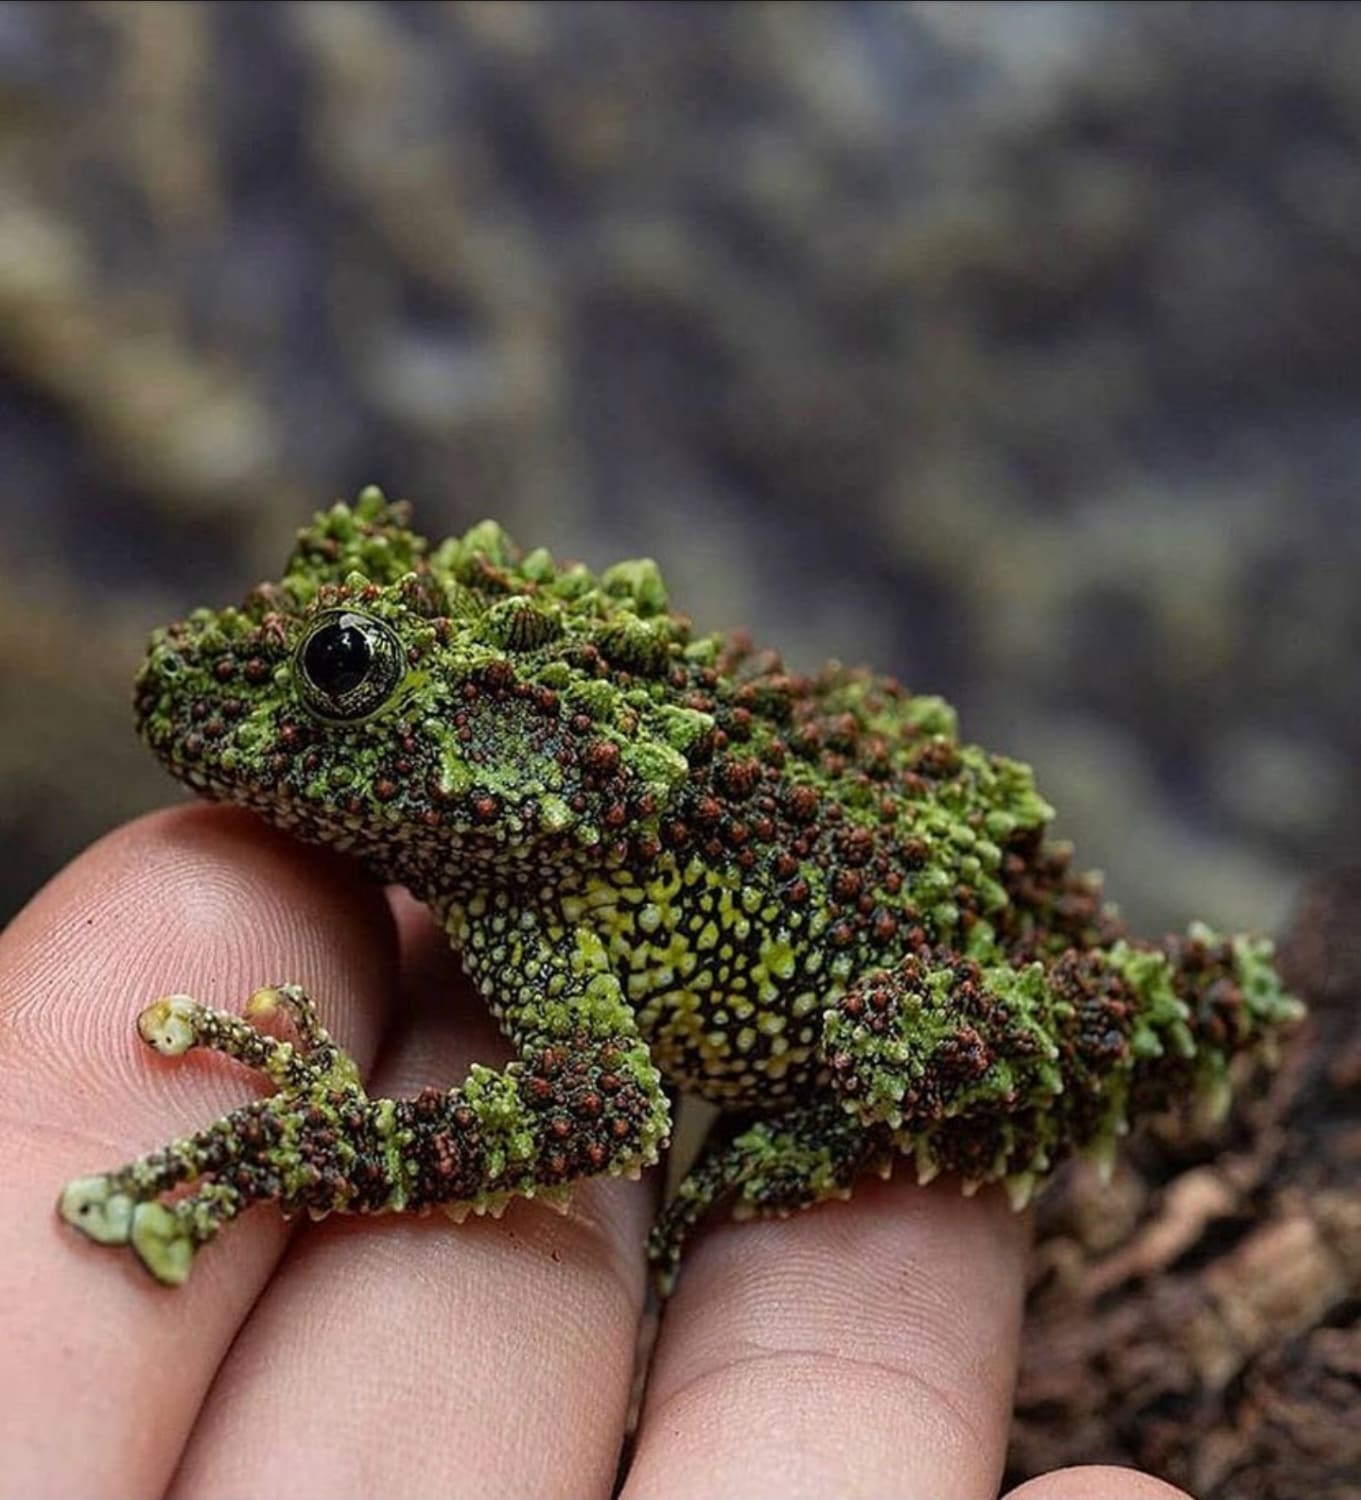 This is Vietnamese mossy frog